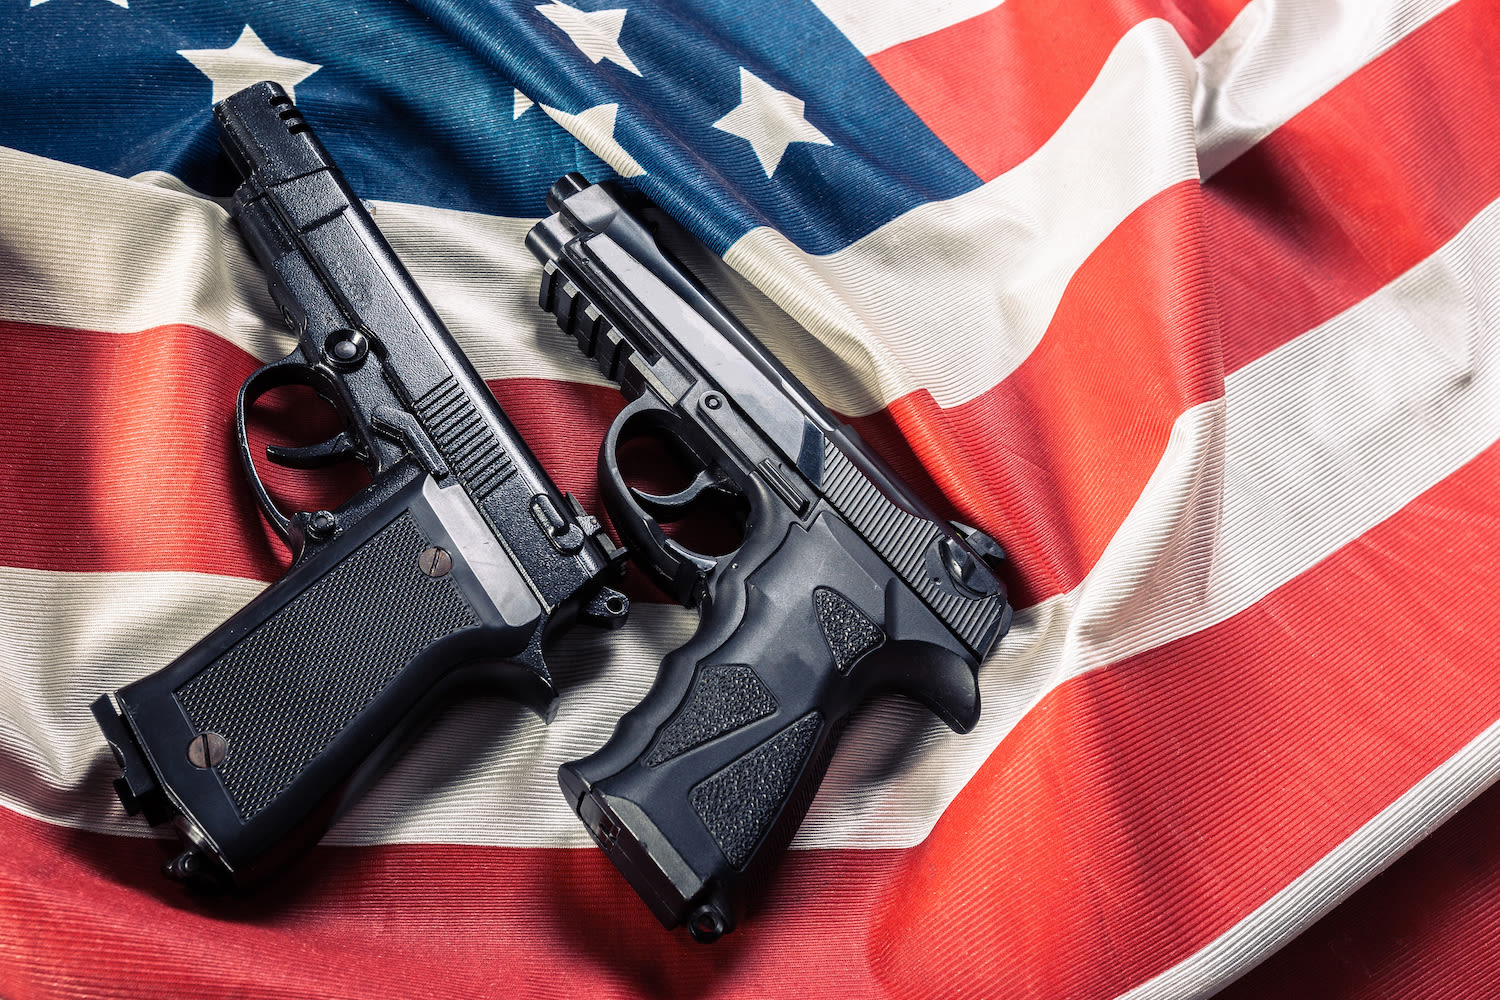 The problem with "Red Flag" gun laws